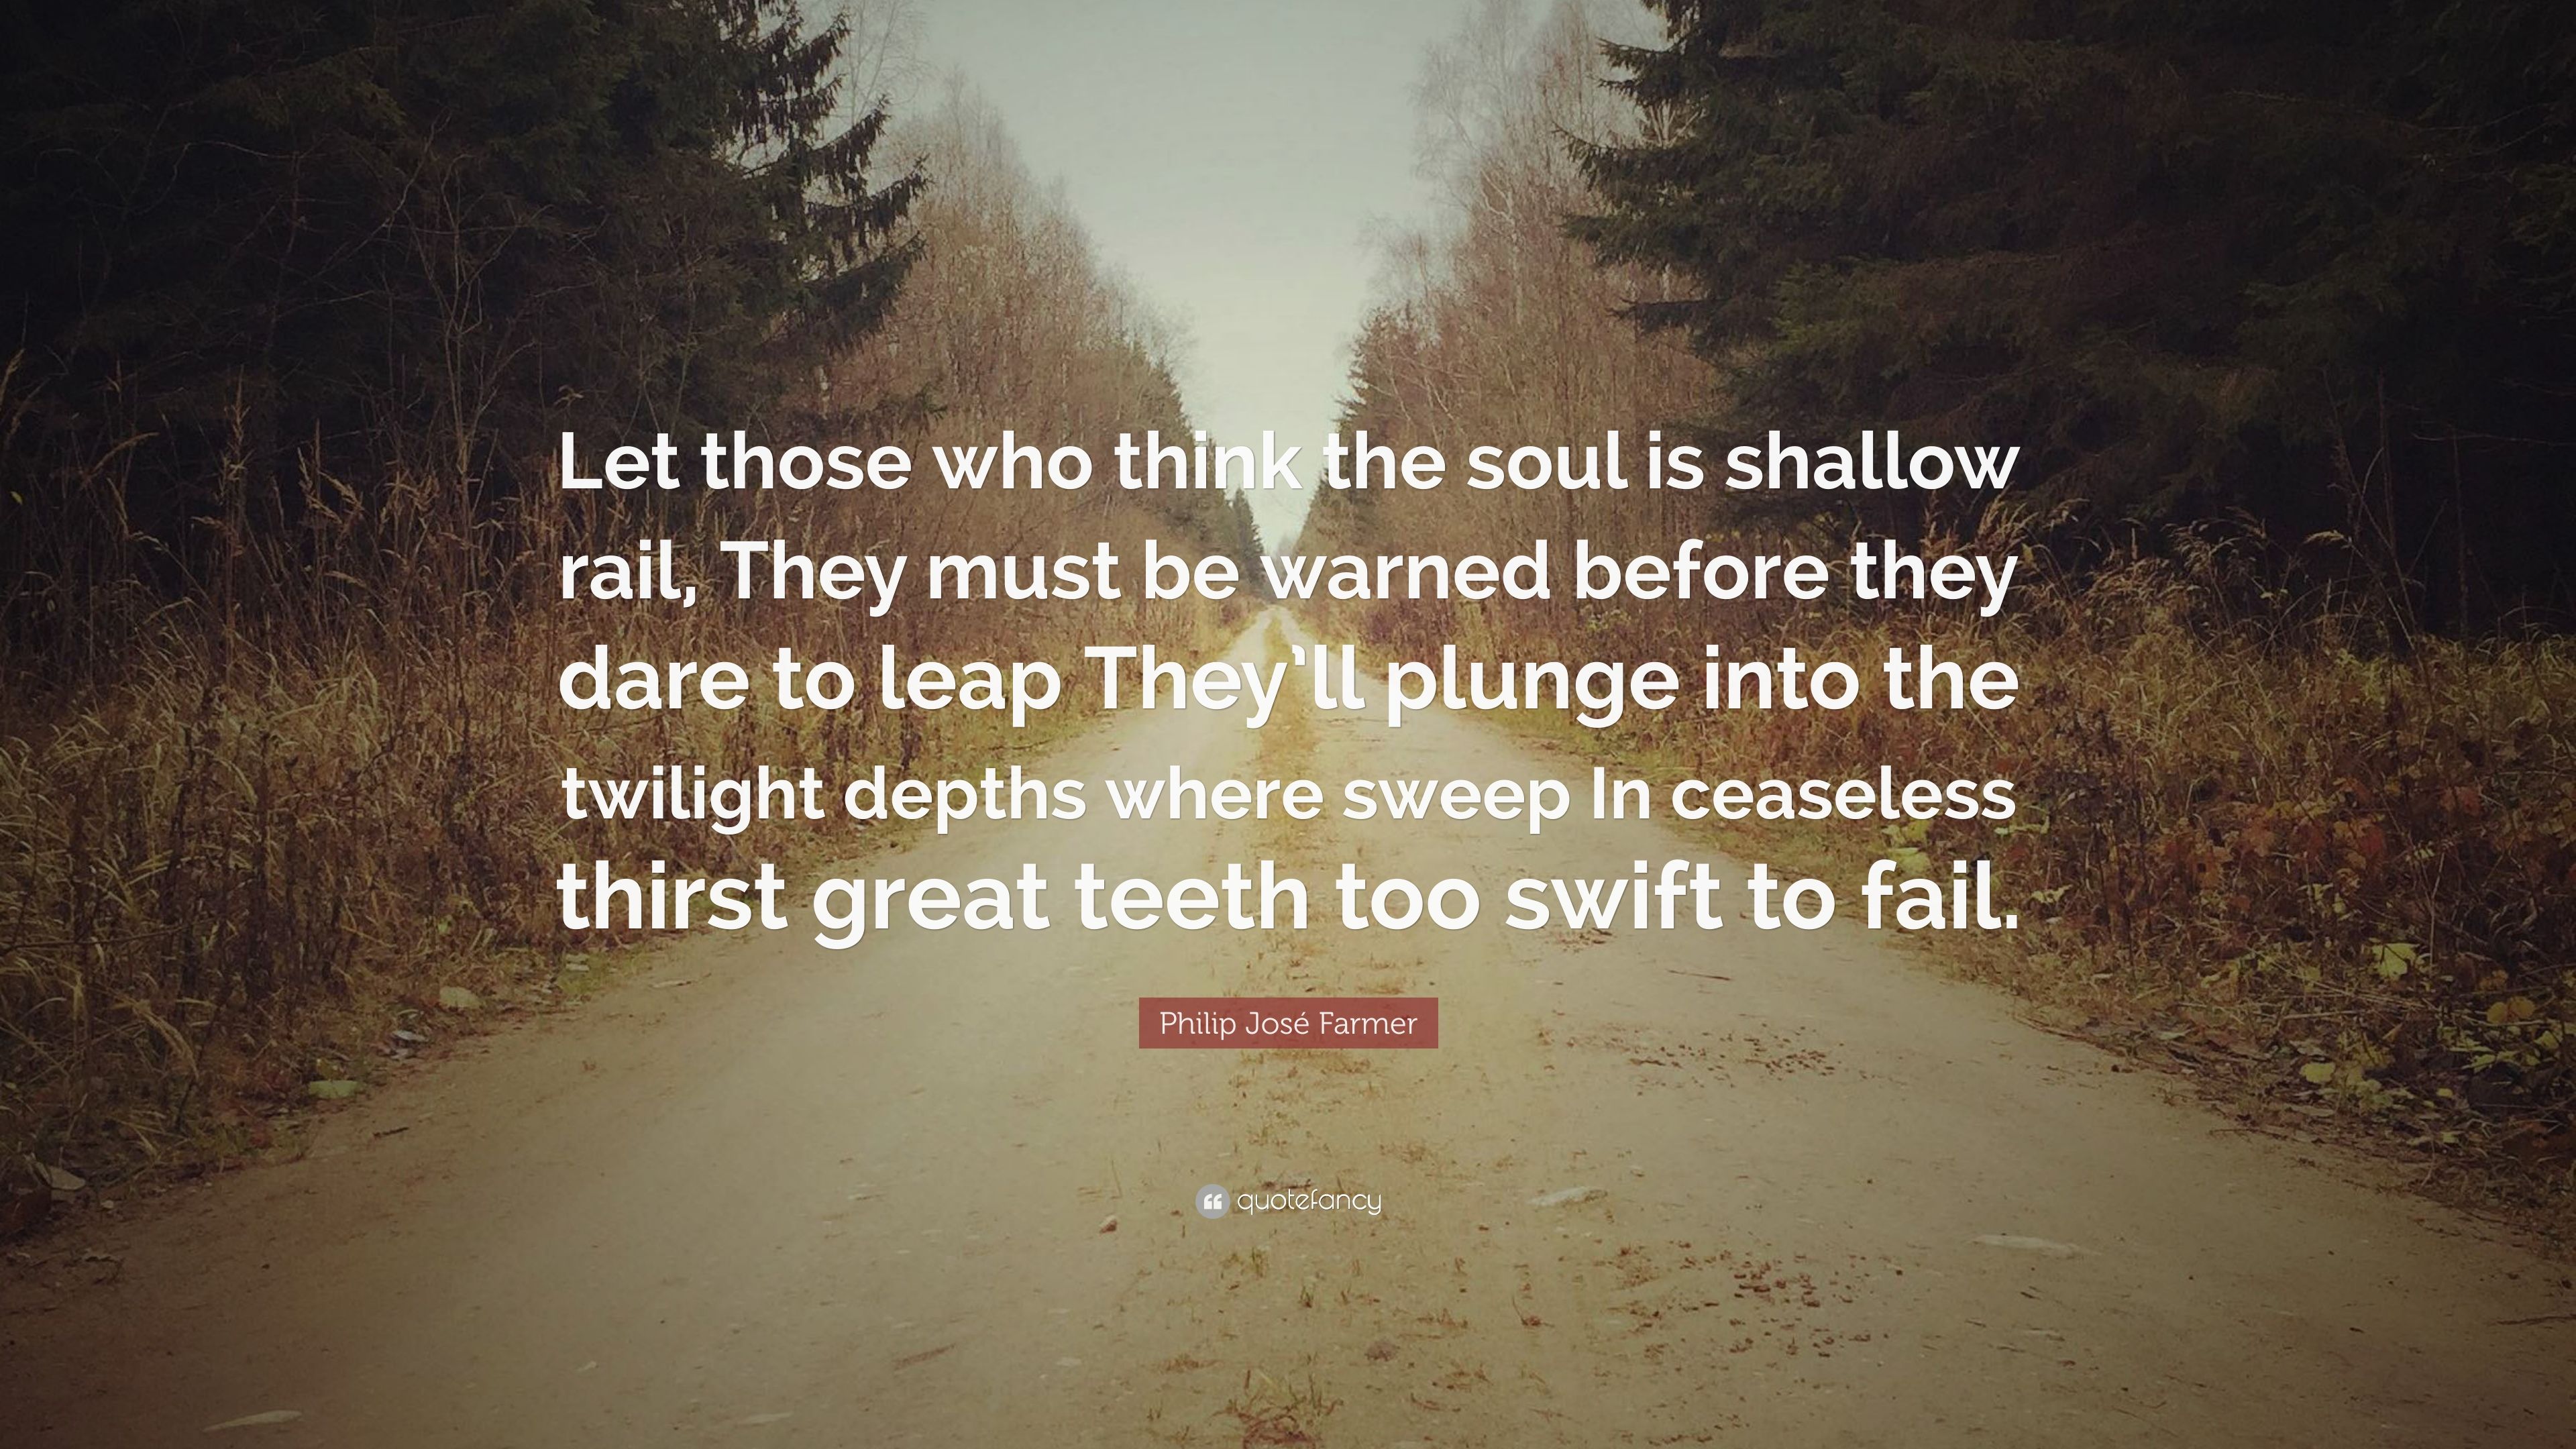 Philip José Farmer Quote: “Let those who think the soul is shallow